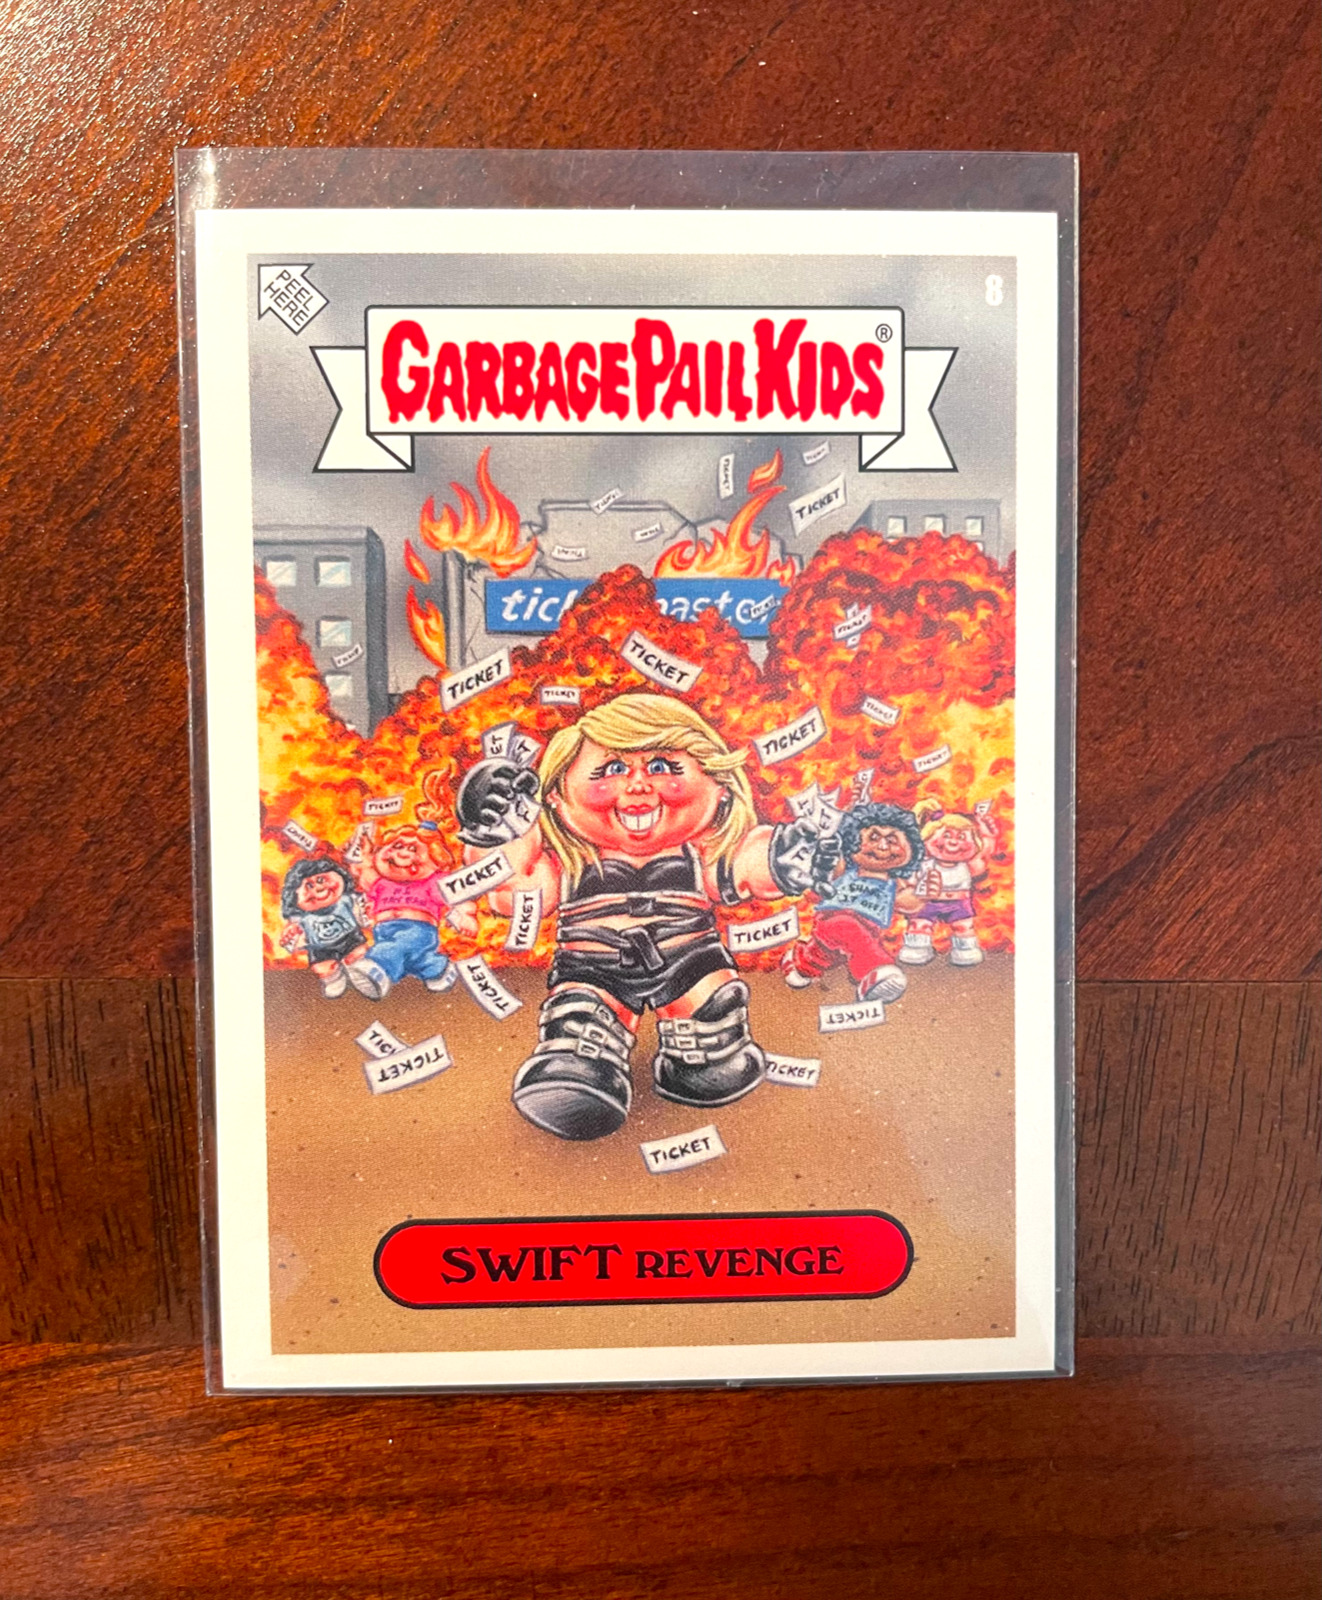 Garbage Pail Kids 2022 Was The Worst # 8 Taylor Swift Revenge